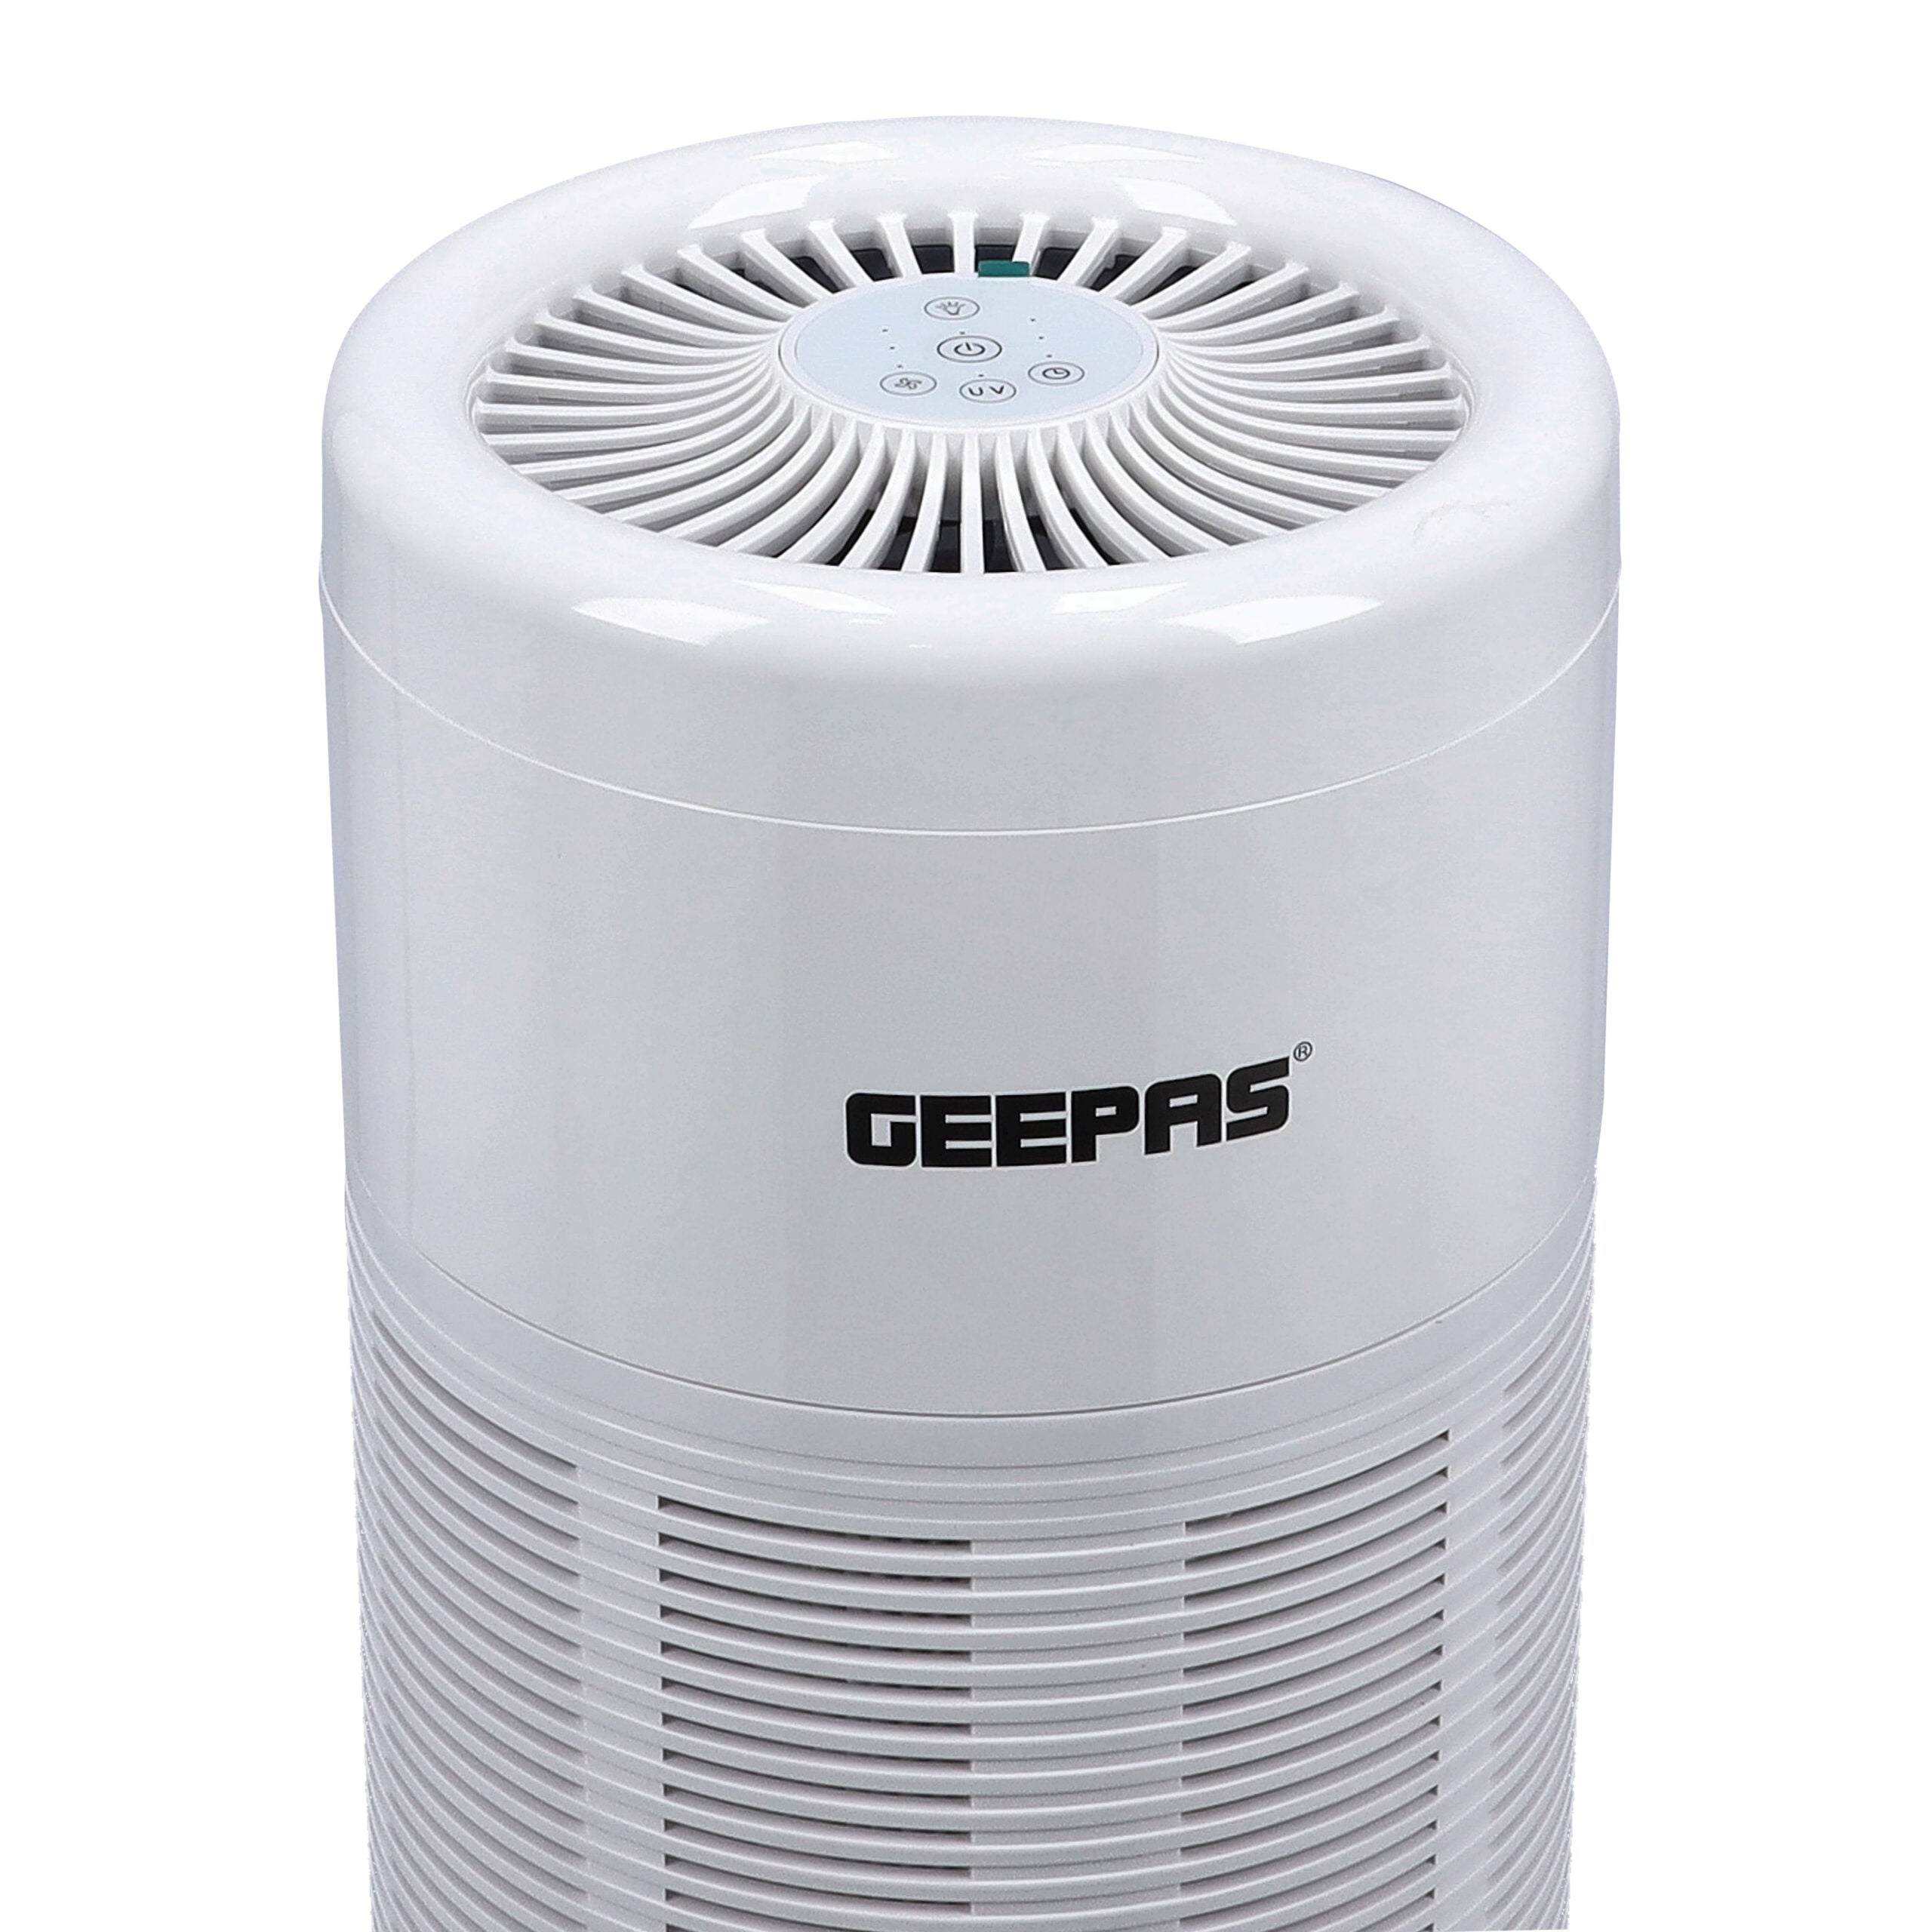 Geepas Air Purifier Touch Control With 3 Timer Speed | in Bahrain | Halabh.com